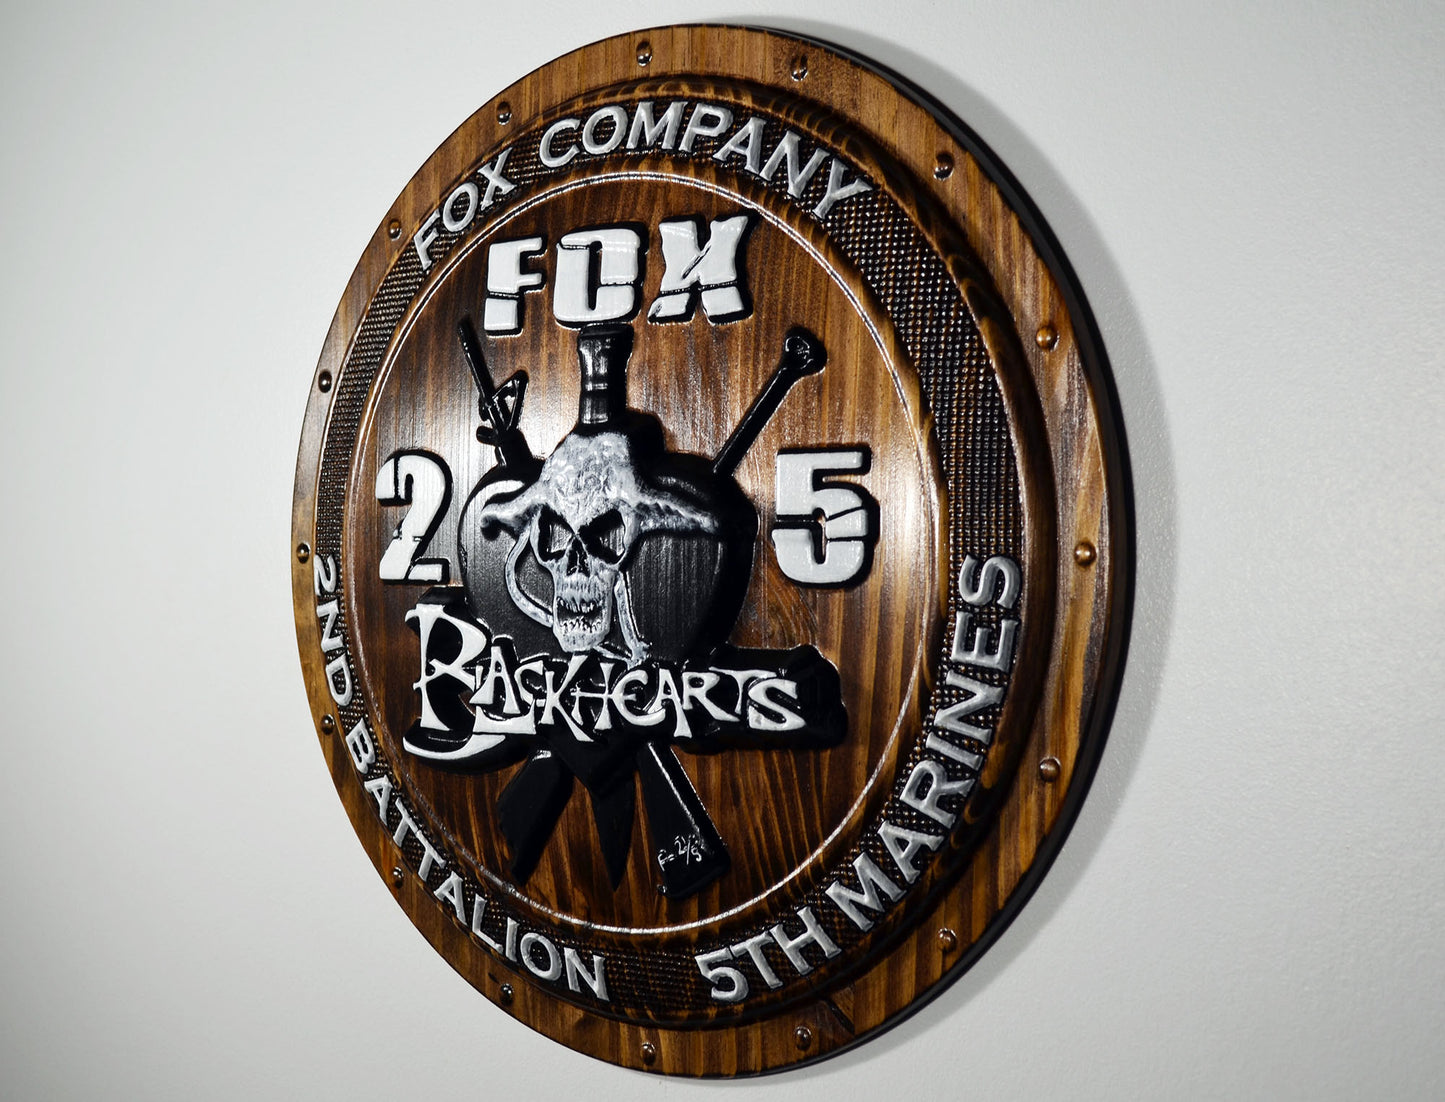 US Marine Corps, Fox Co, 2nd Battalion, 5th Marines, Blackhearts, 3d wood carving, military plaque